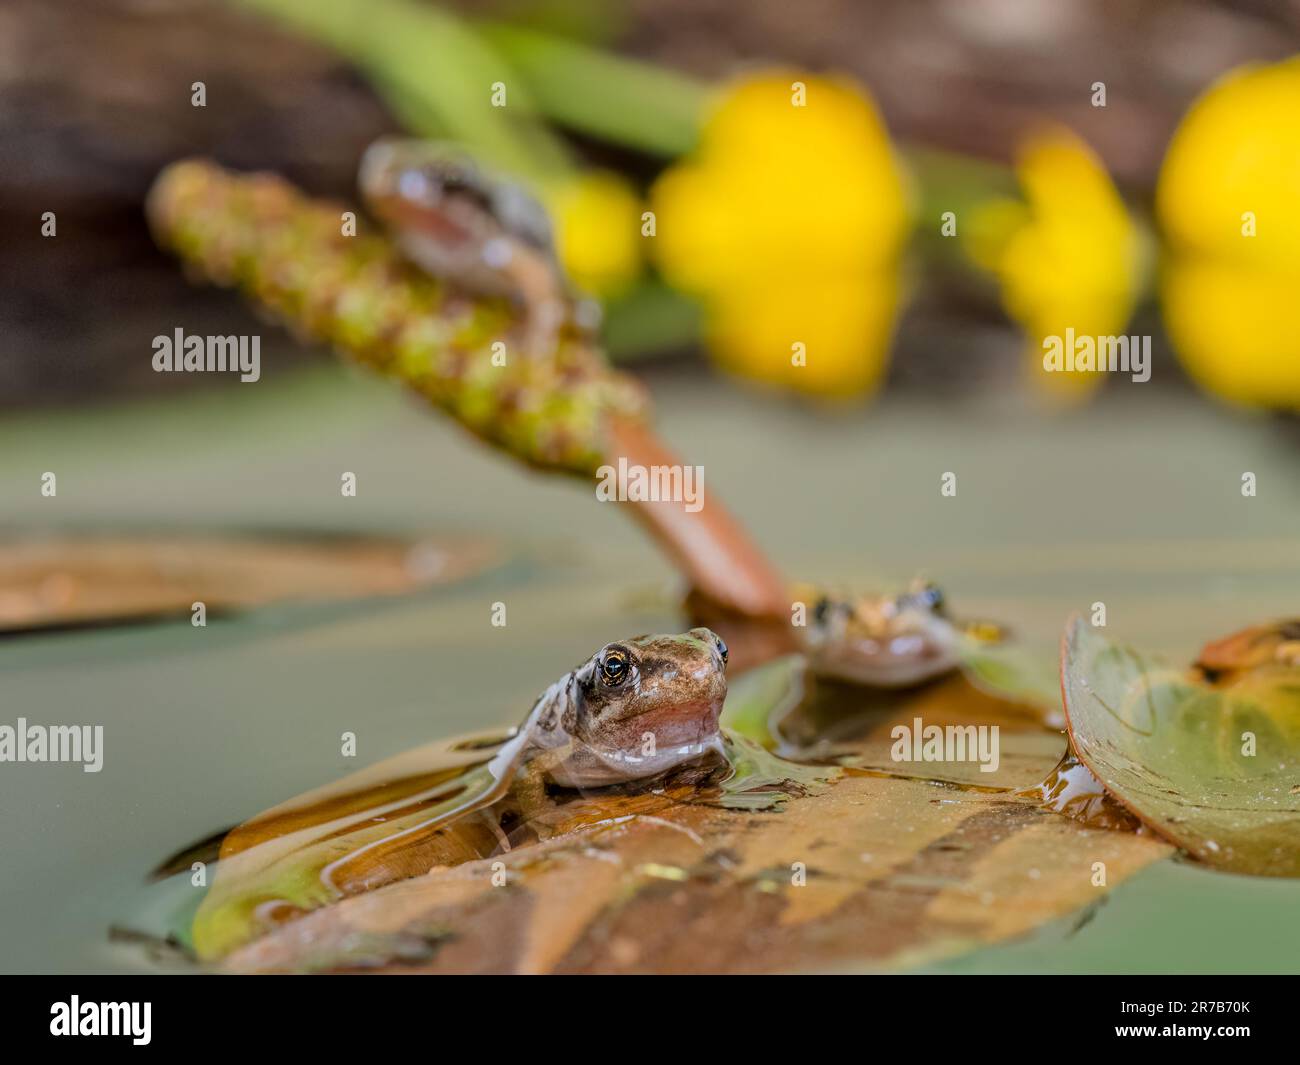 Common froglets photographed in a controlled environment before being returned to the same spot where the yhad been found. Stock Photo